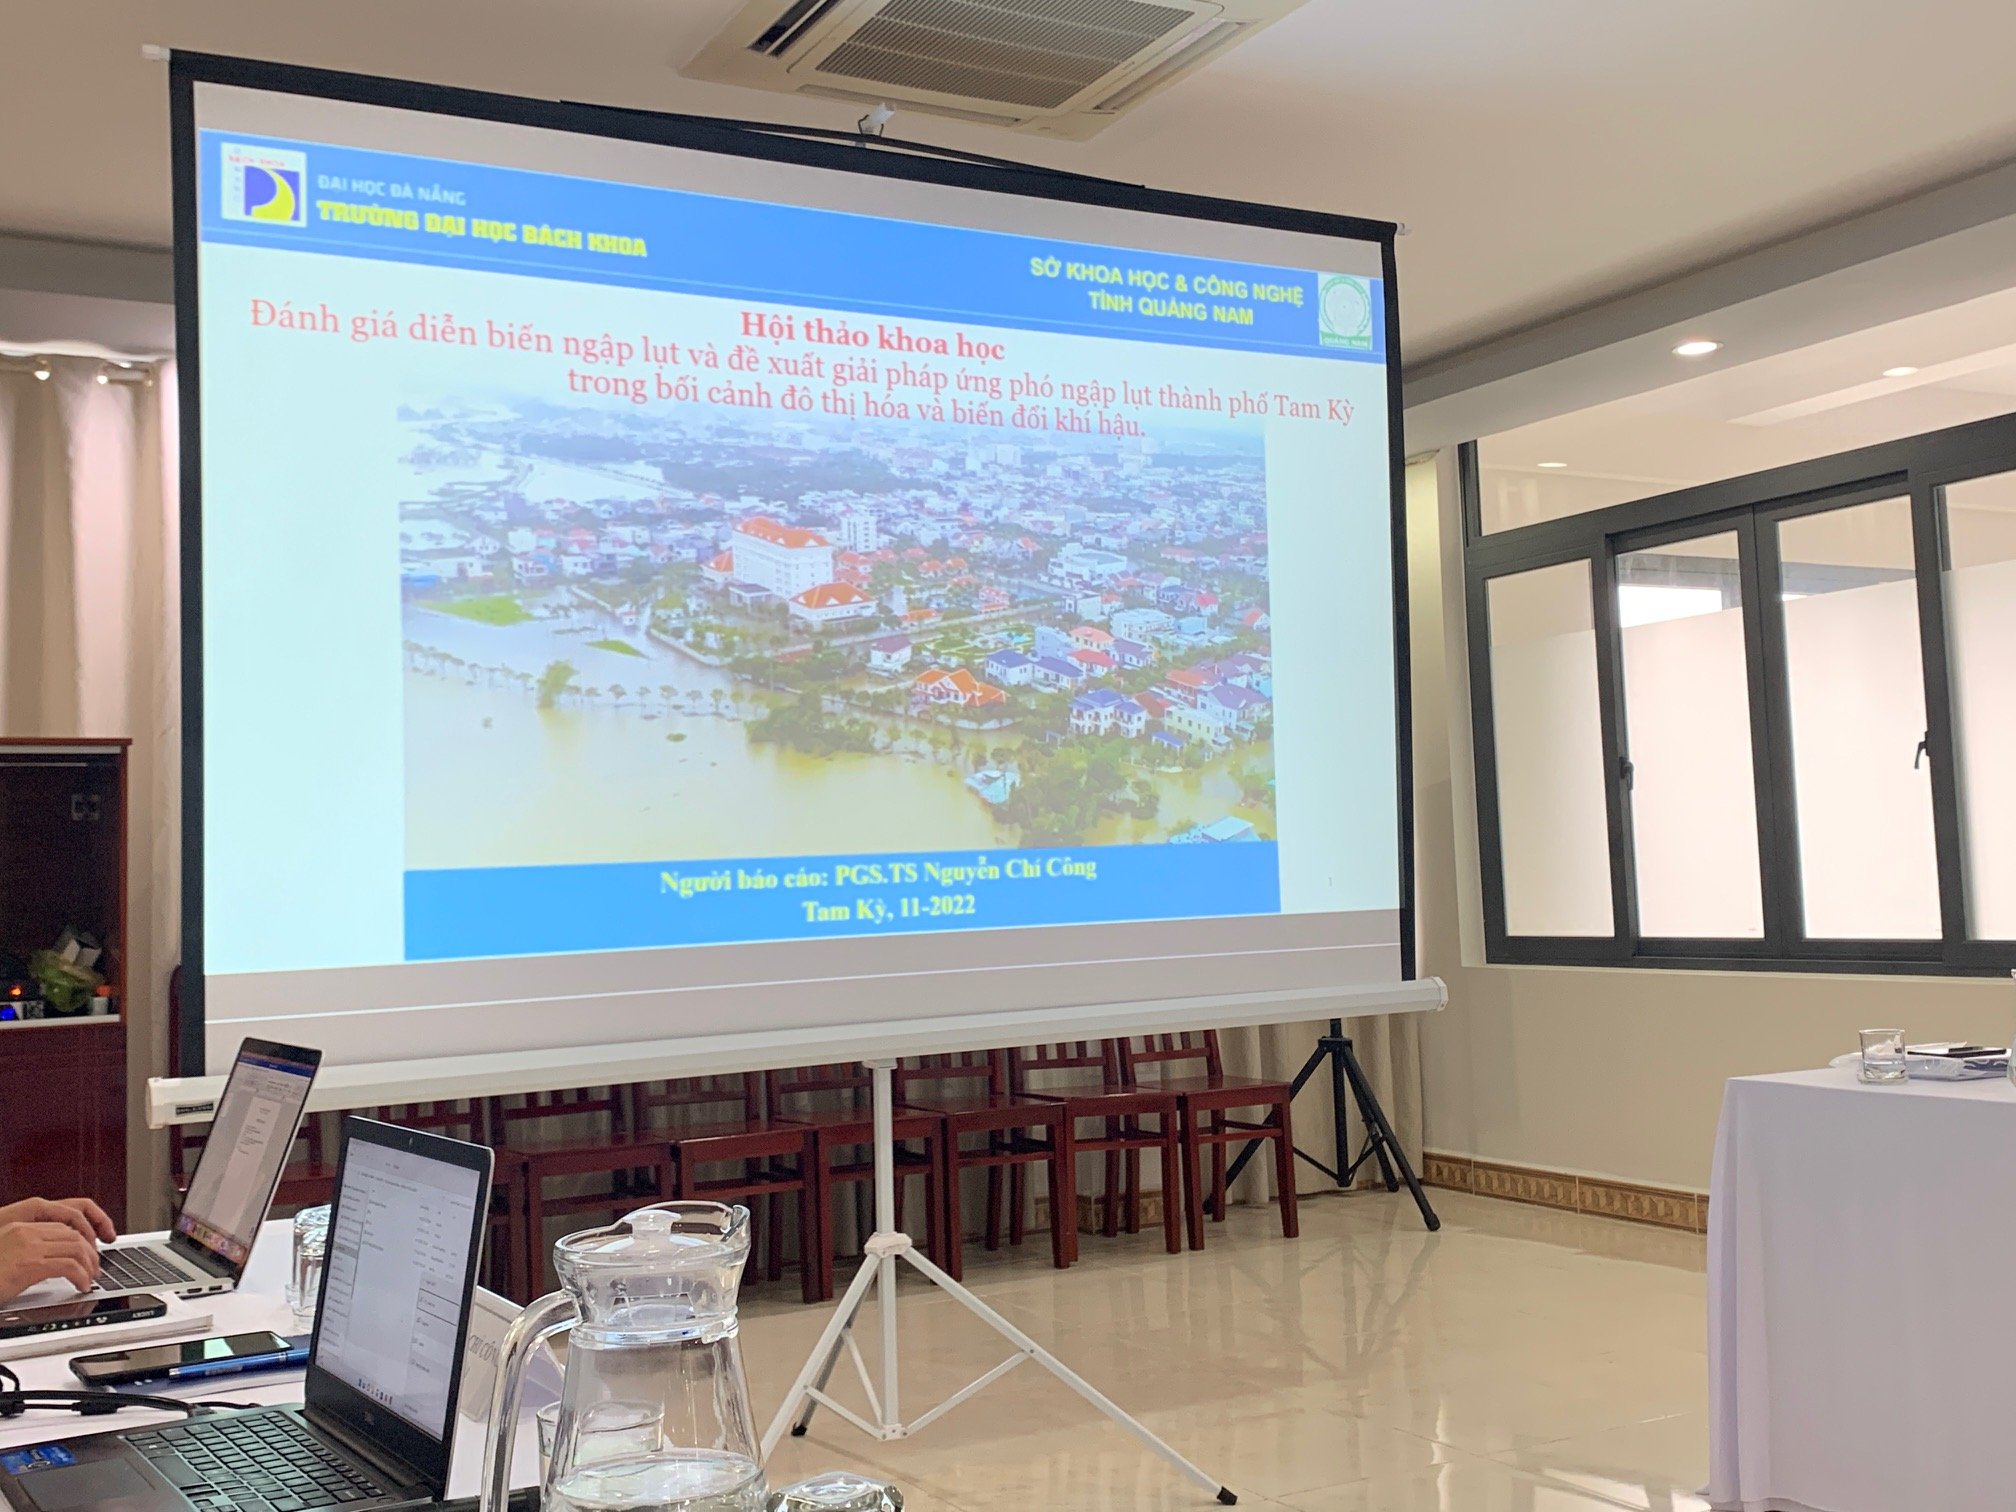 SCIENTIFIC WORKSHOP TO ASSESS FLOOD SITUATION AND PROPOSE SOLUTIONS TO COPE WITH FLOODS IN TAM KY CITY